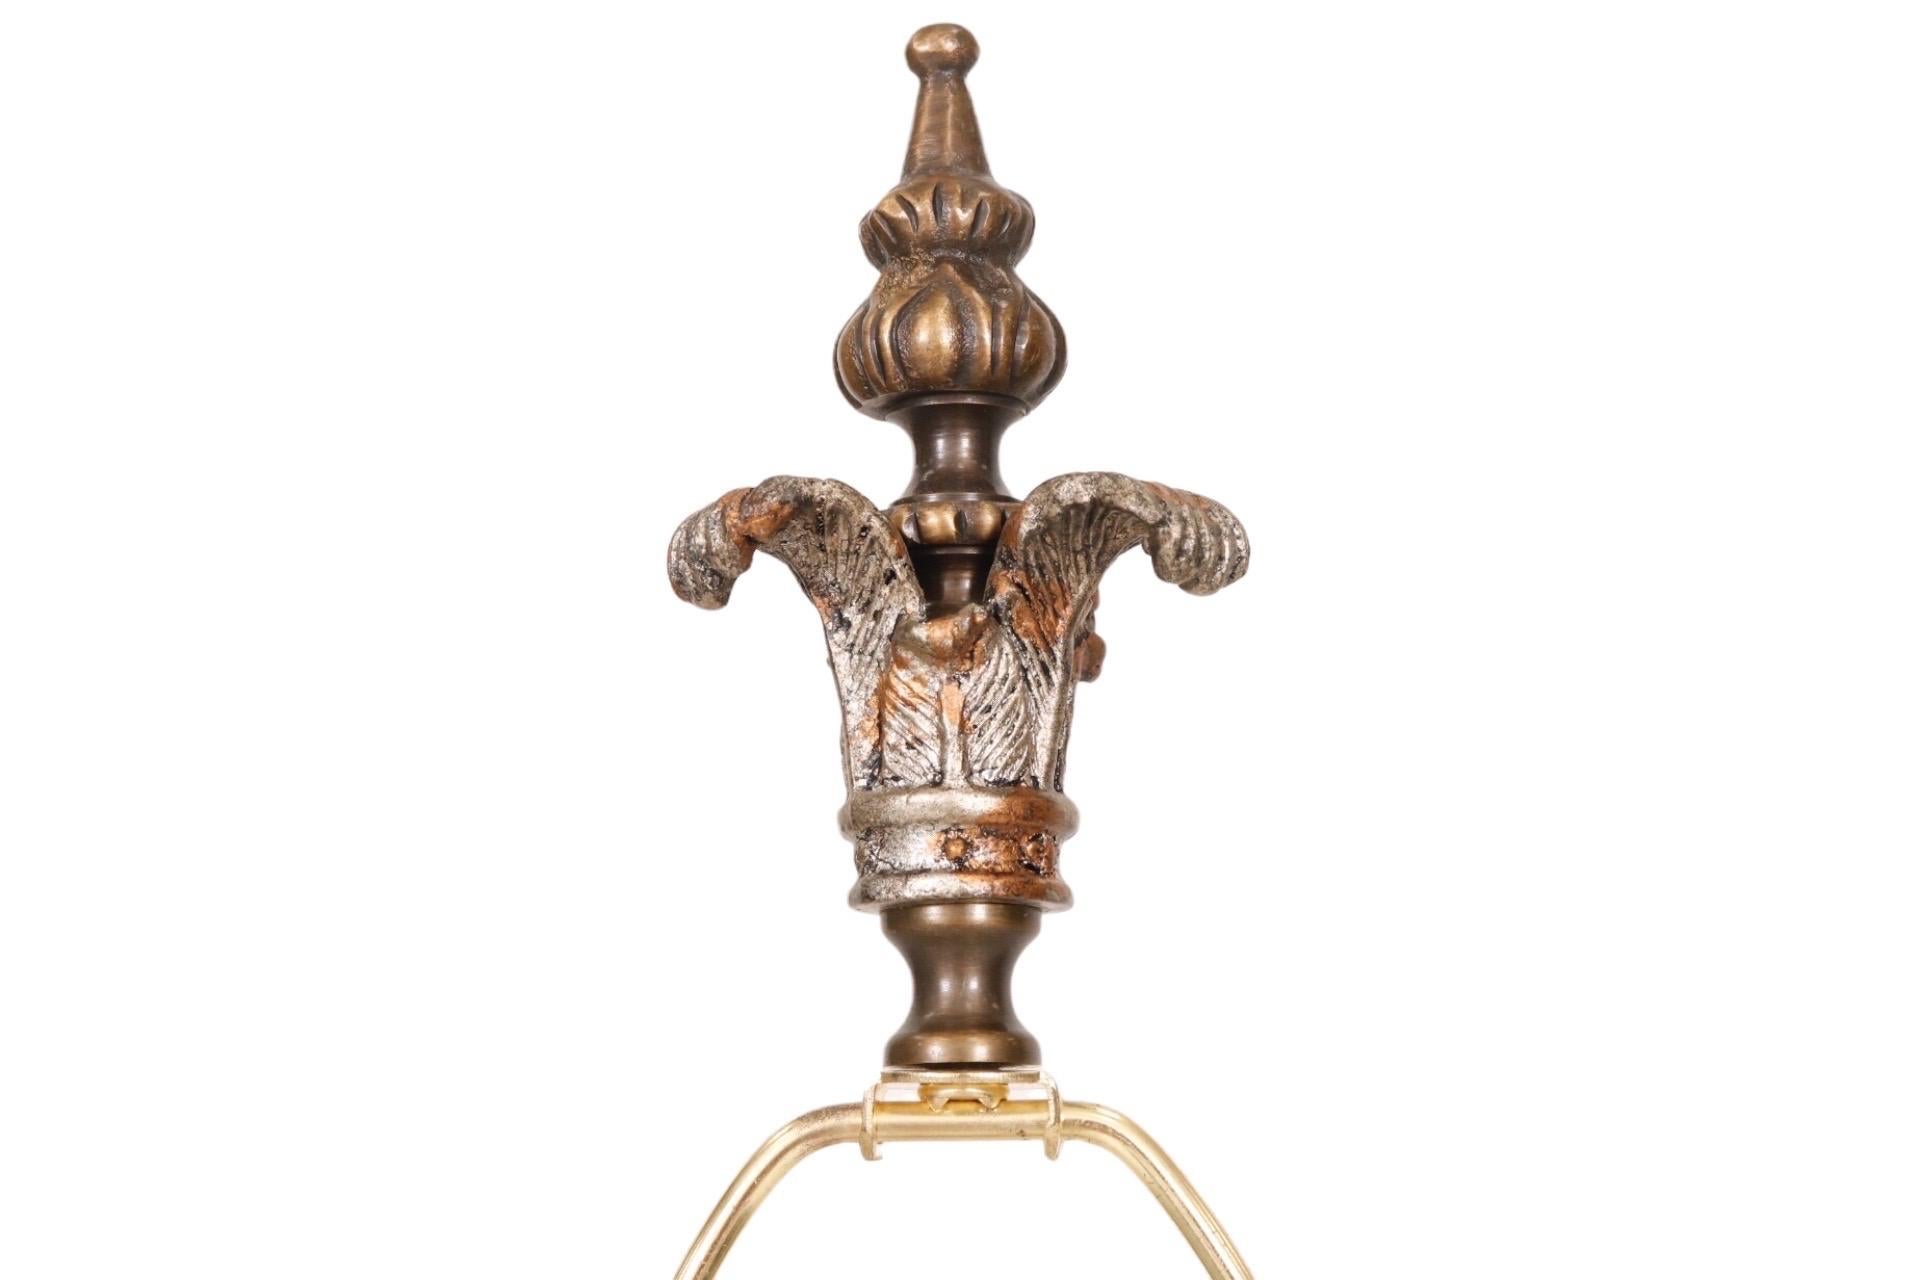 A pair of French Empire table lamps by Alexander John. Finials and tall central columns are decorated with a repeating cast motif of three feathers. The lower of which supports marbled black and white bakelite spheres. Two lucite blocks and cast